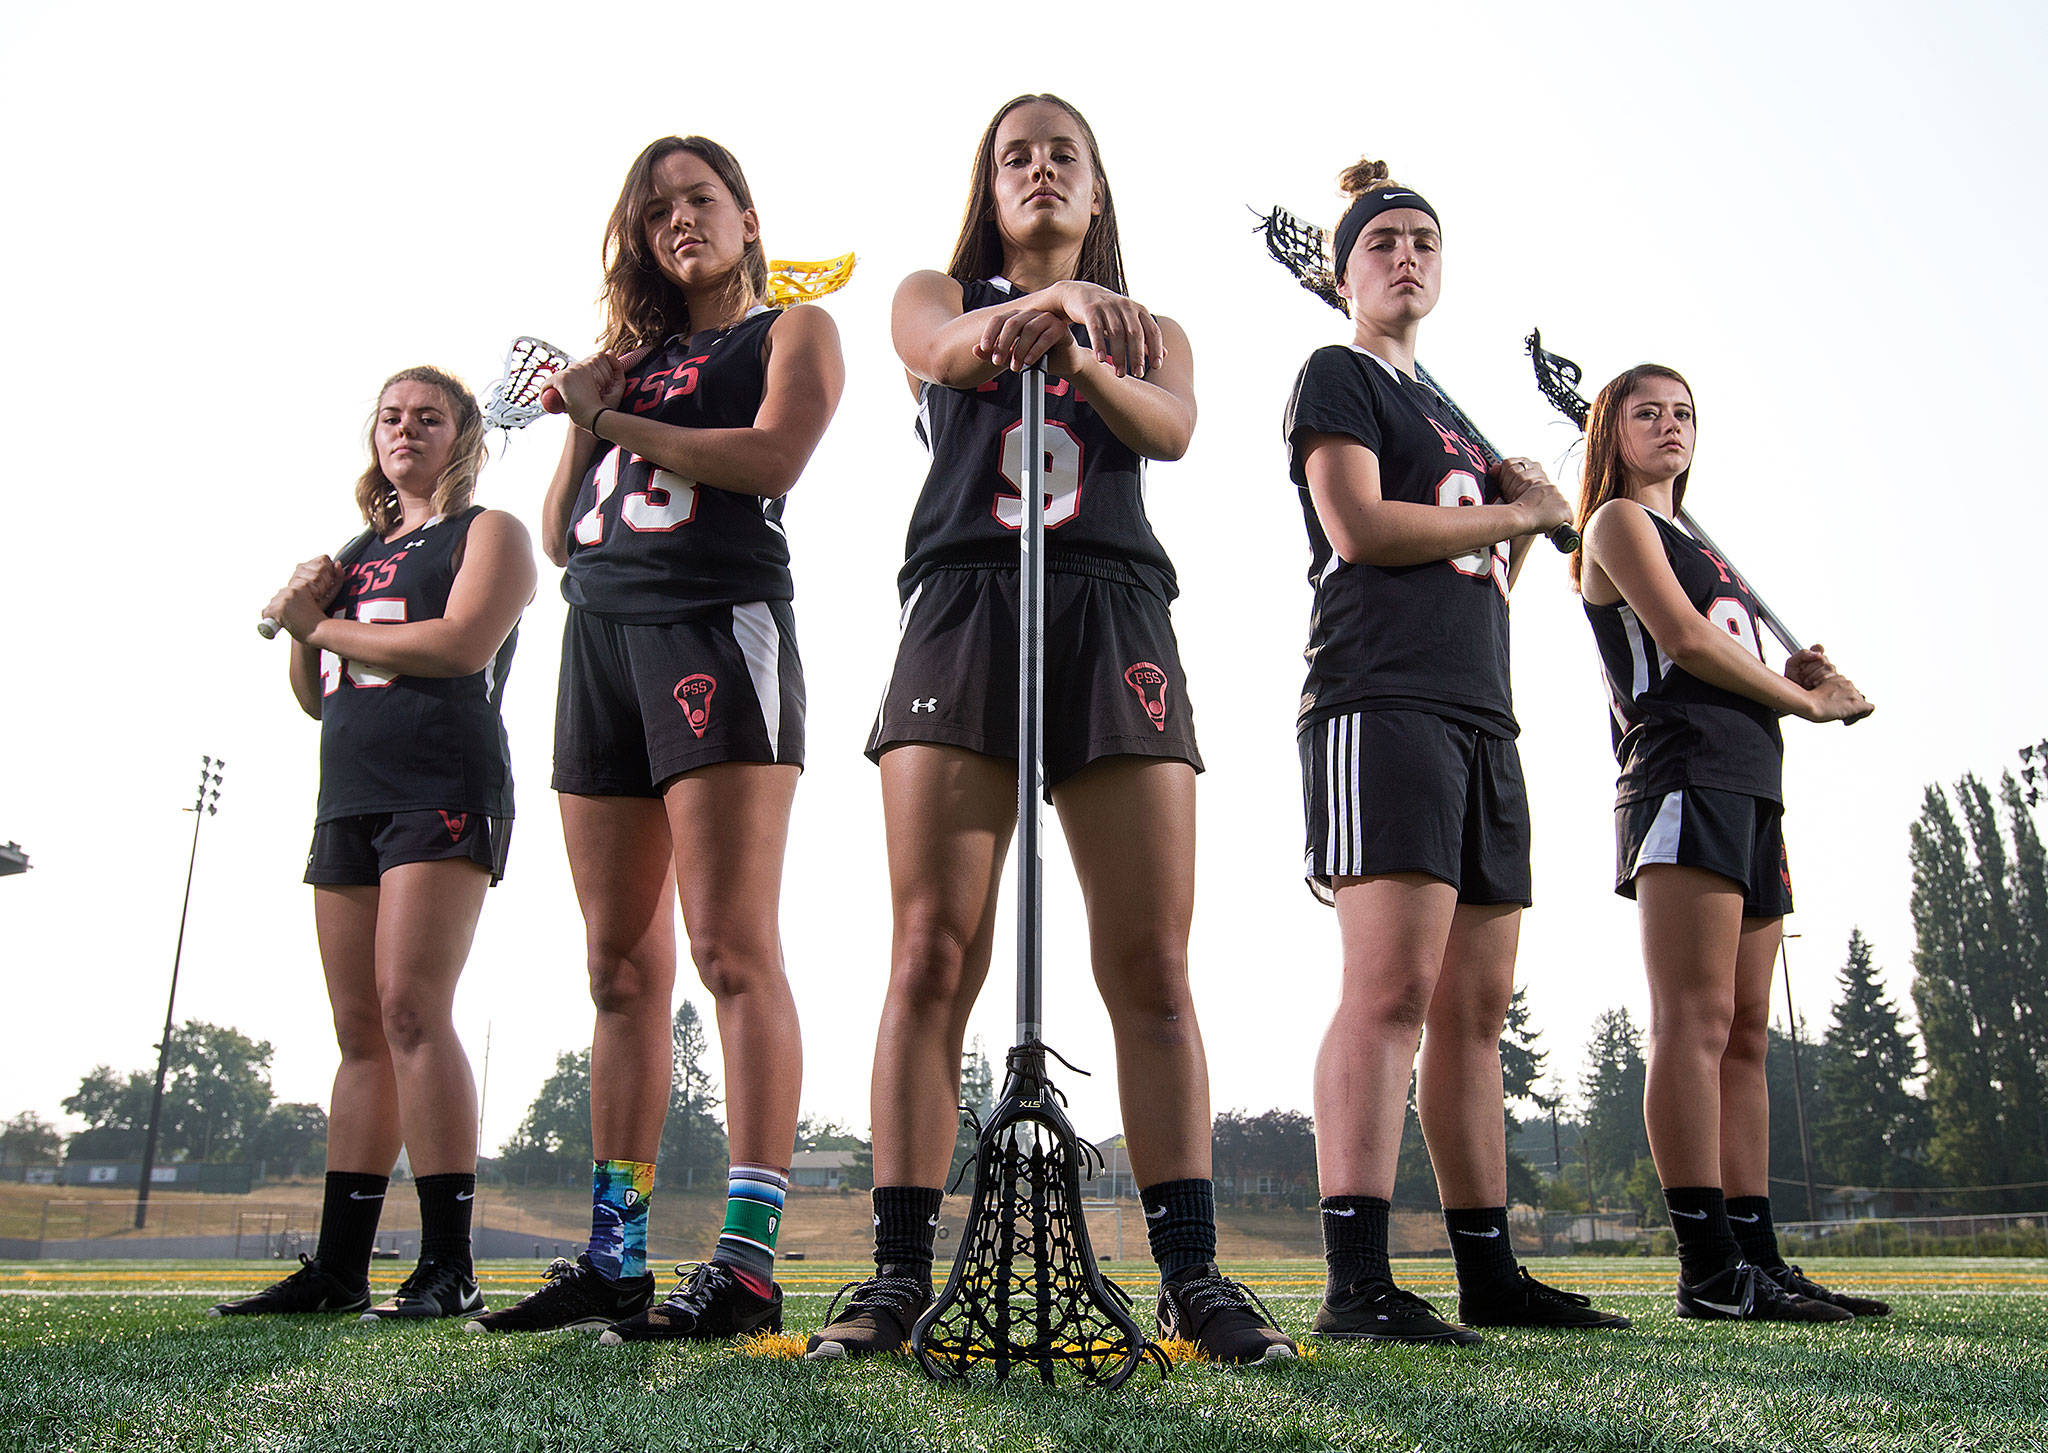 From left, lacrosse players Hailey Carlin, Aenne Thom, Sydney Landdeck, Jordyn Vaughn and Carolynn Barashkoff pose together Tuesday at Snohomish High School. The five Snohomish County residents played in the World Cup Lacrosse Festival, an under-19 tournament with teams from around the world, held in the London suburb of Guildford.